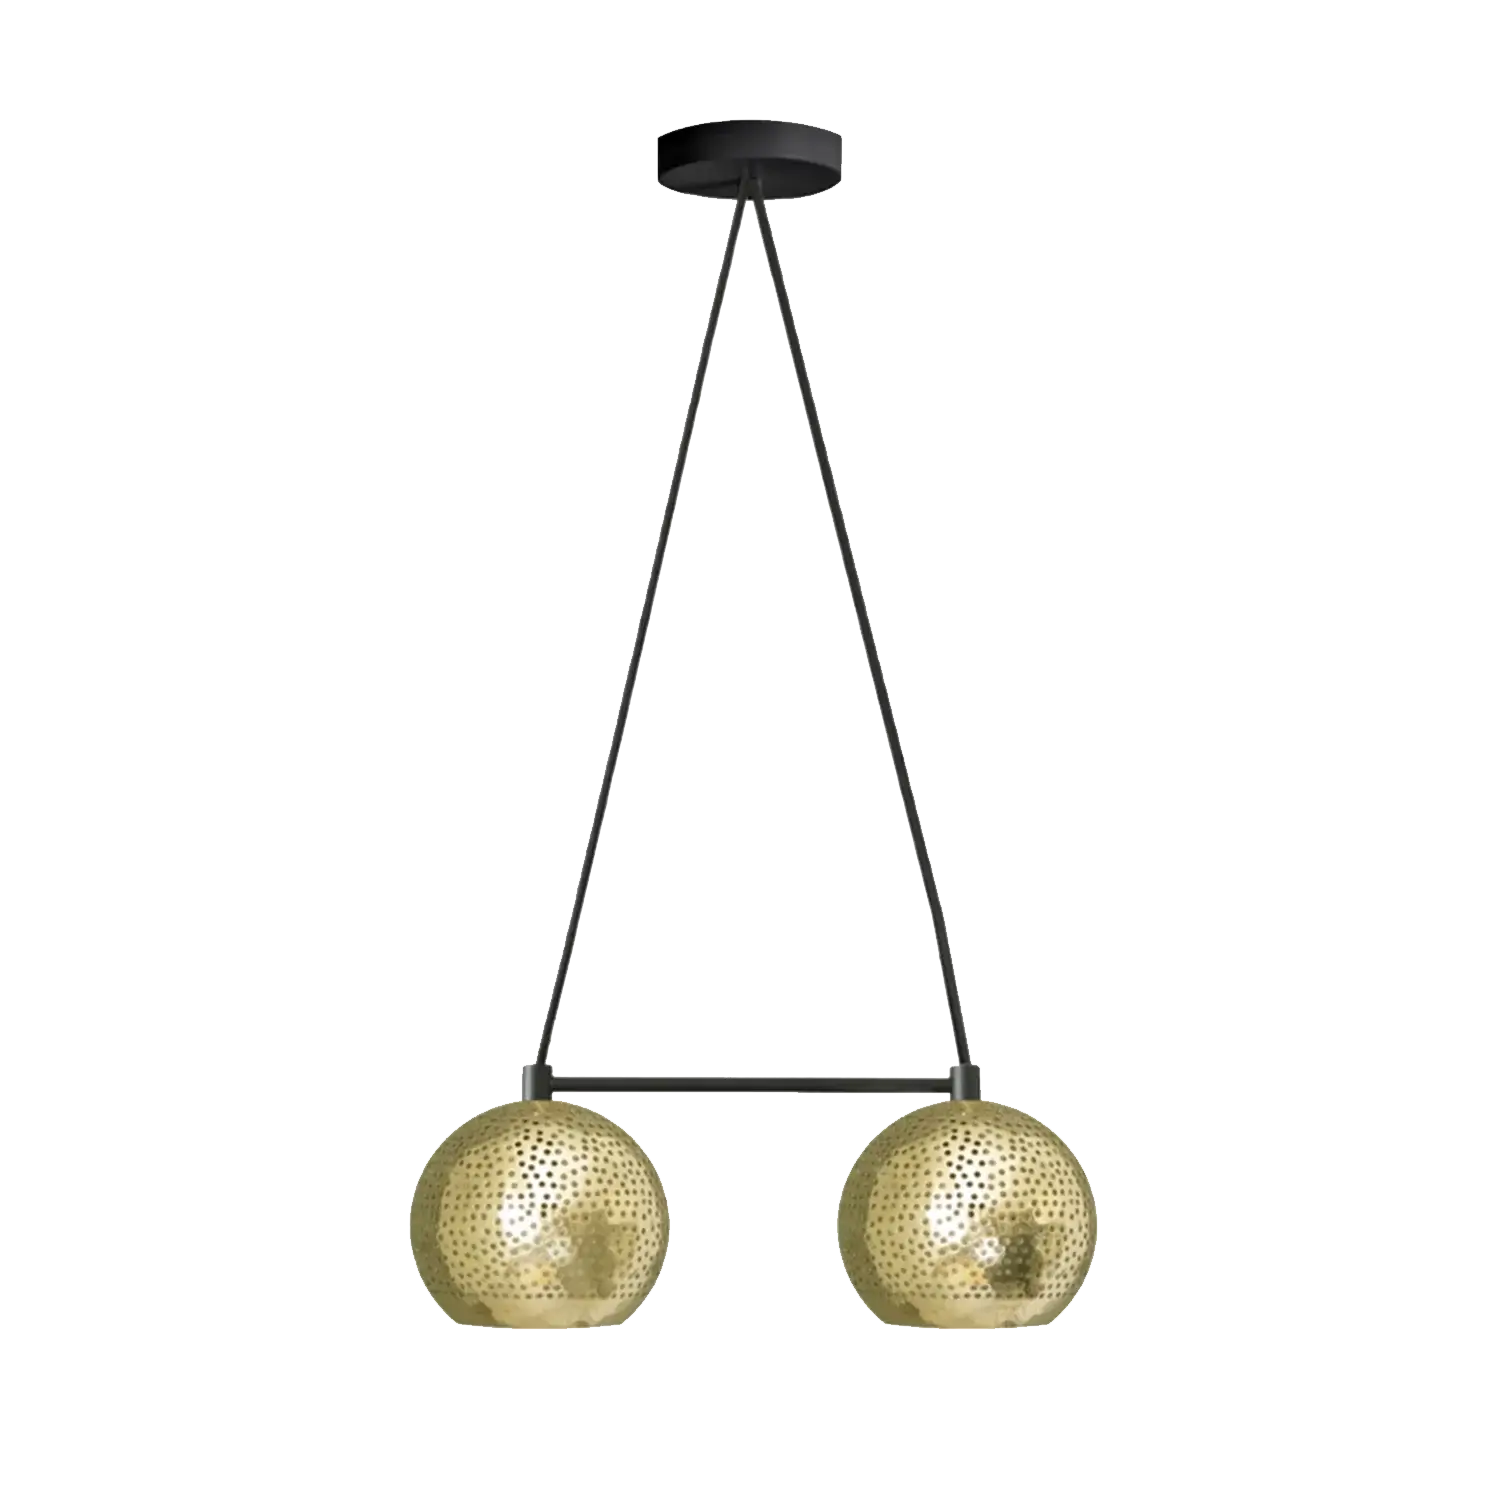 Dounia home Chandelier in Polished brass made of Metal, Model: Shams